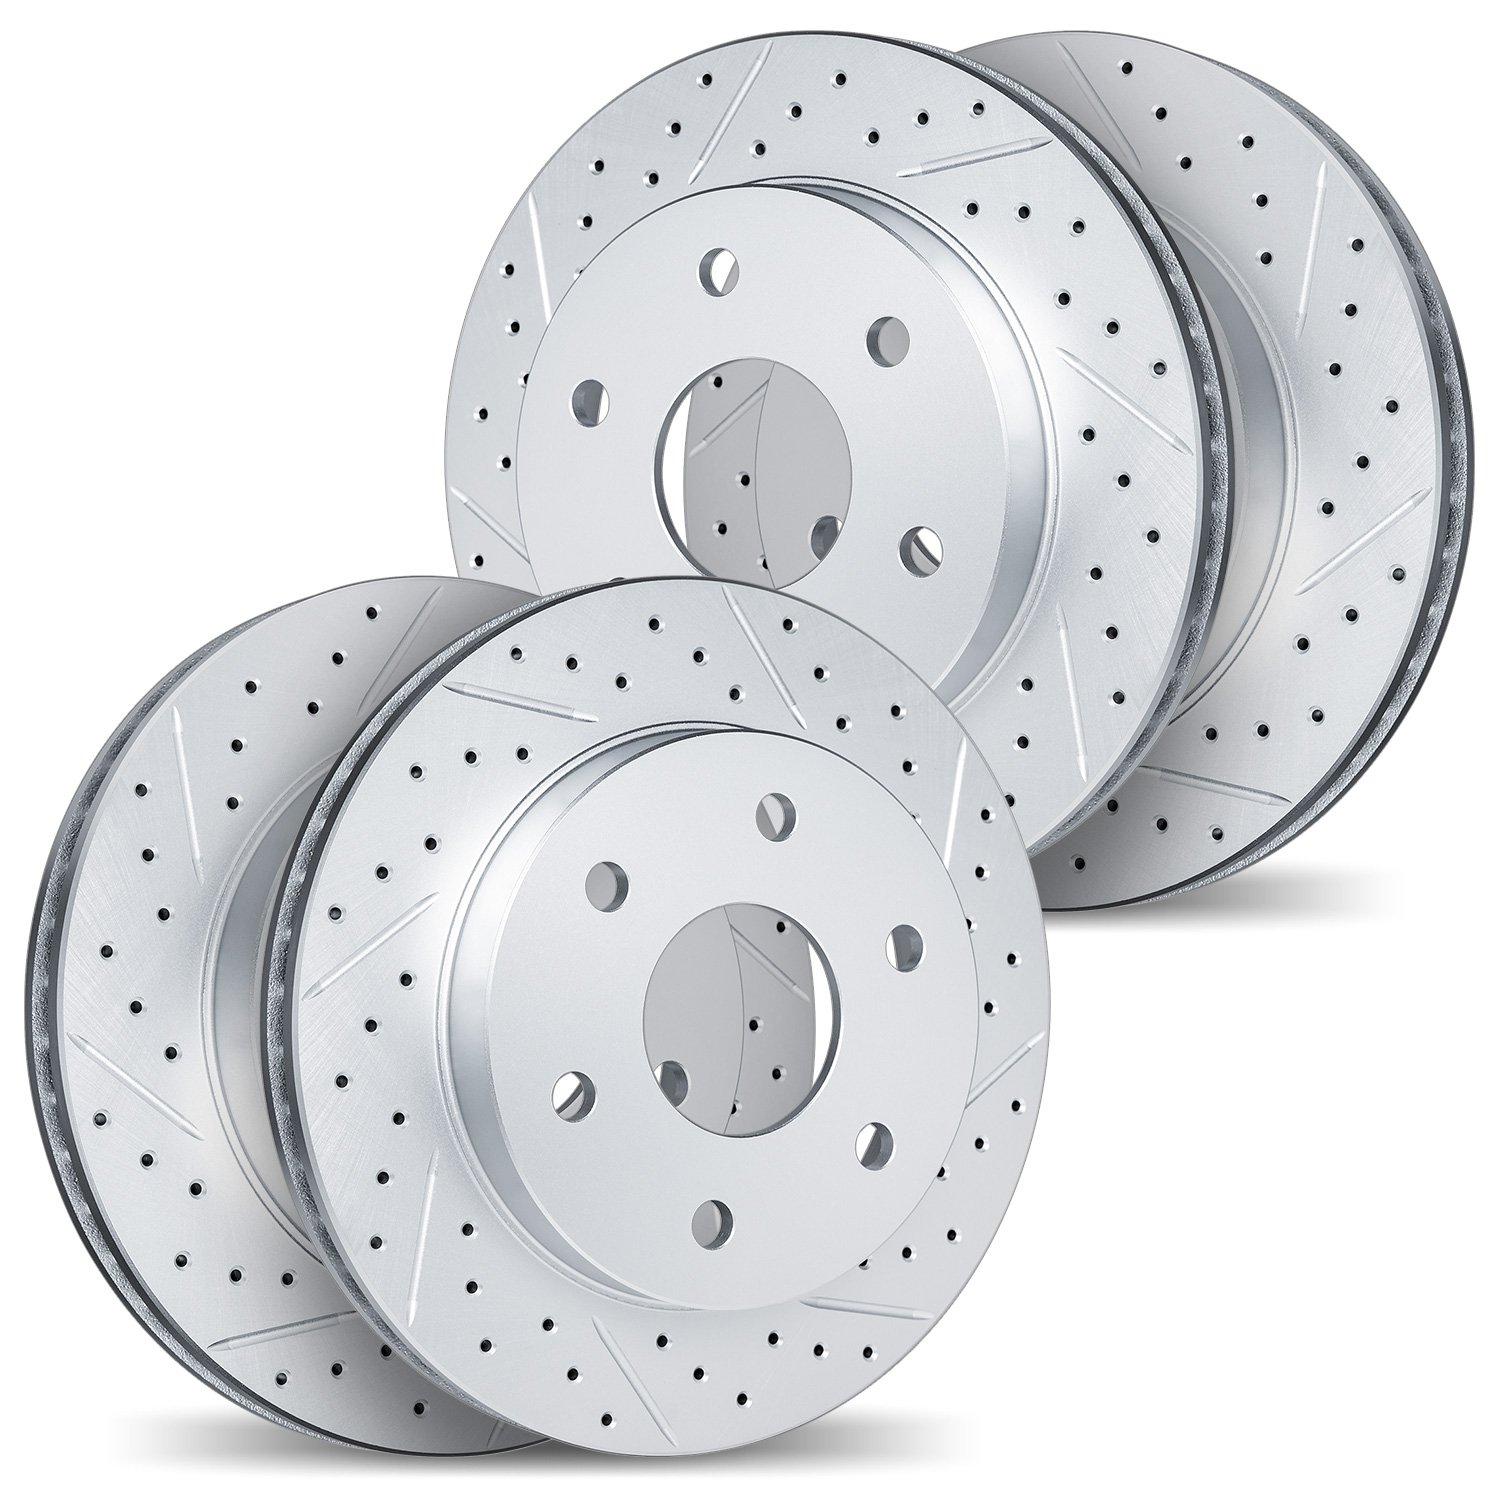 2004-48001 Geoperformance Drilled/Slotted Brake Rotors, Fits Select GM, Position: Front and Rear